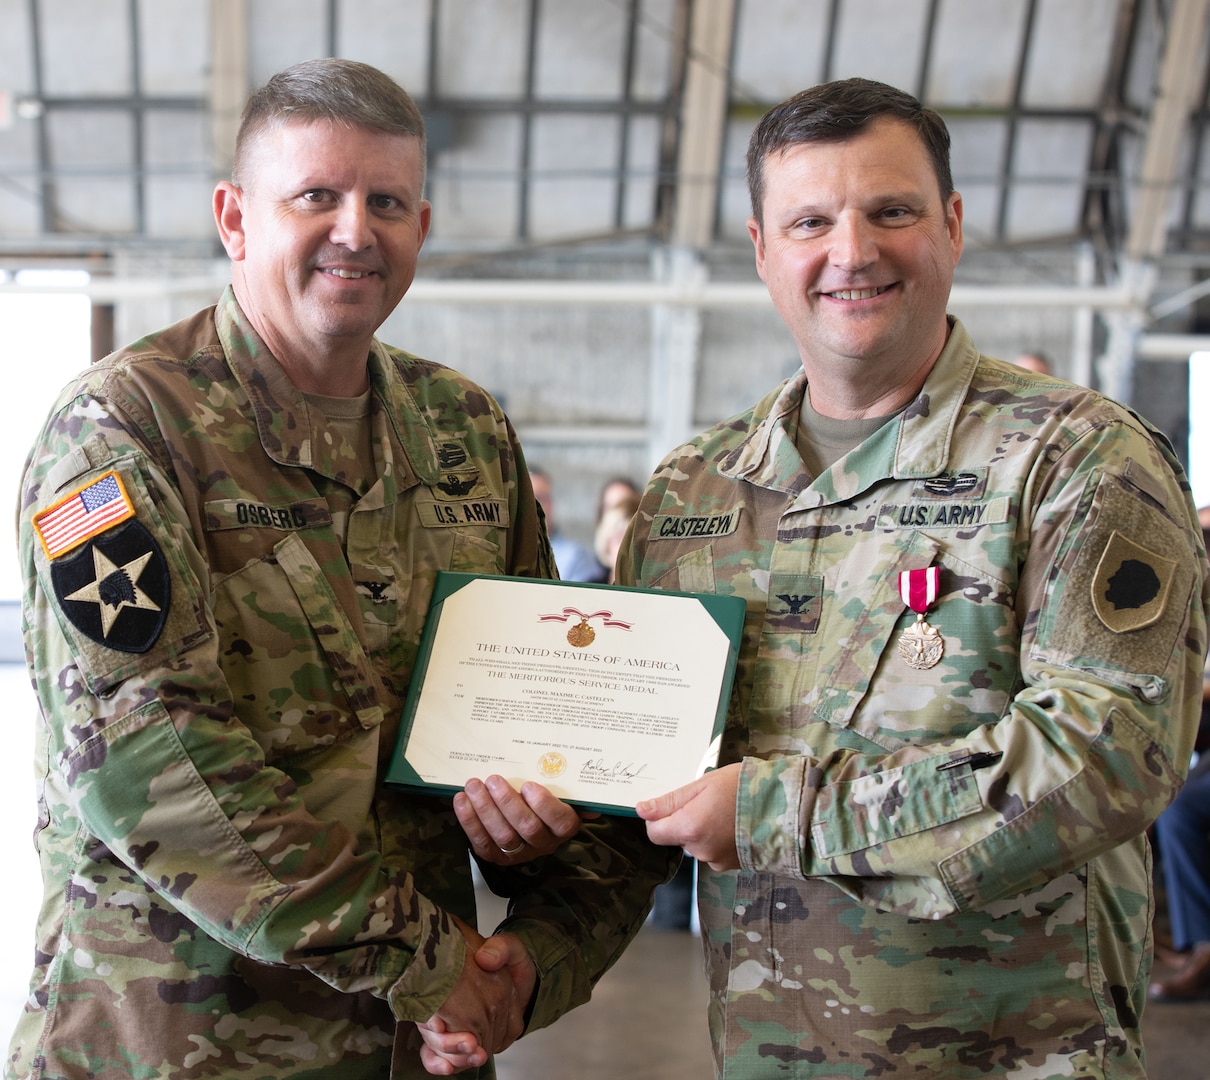 Illinois Army National Guard Col. Jason Osberg presents Col. Max Casteleyn with the Meritorious Service Medal during the change of command ceremony Aug. 27, 2023 in Peoria, Illinois, for commendable service as the commander of the 244th Digital Liaison Detachment, spanning from Jan. 10, 2022 to Aug. 27, 2023.